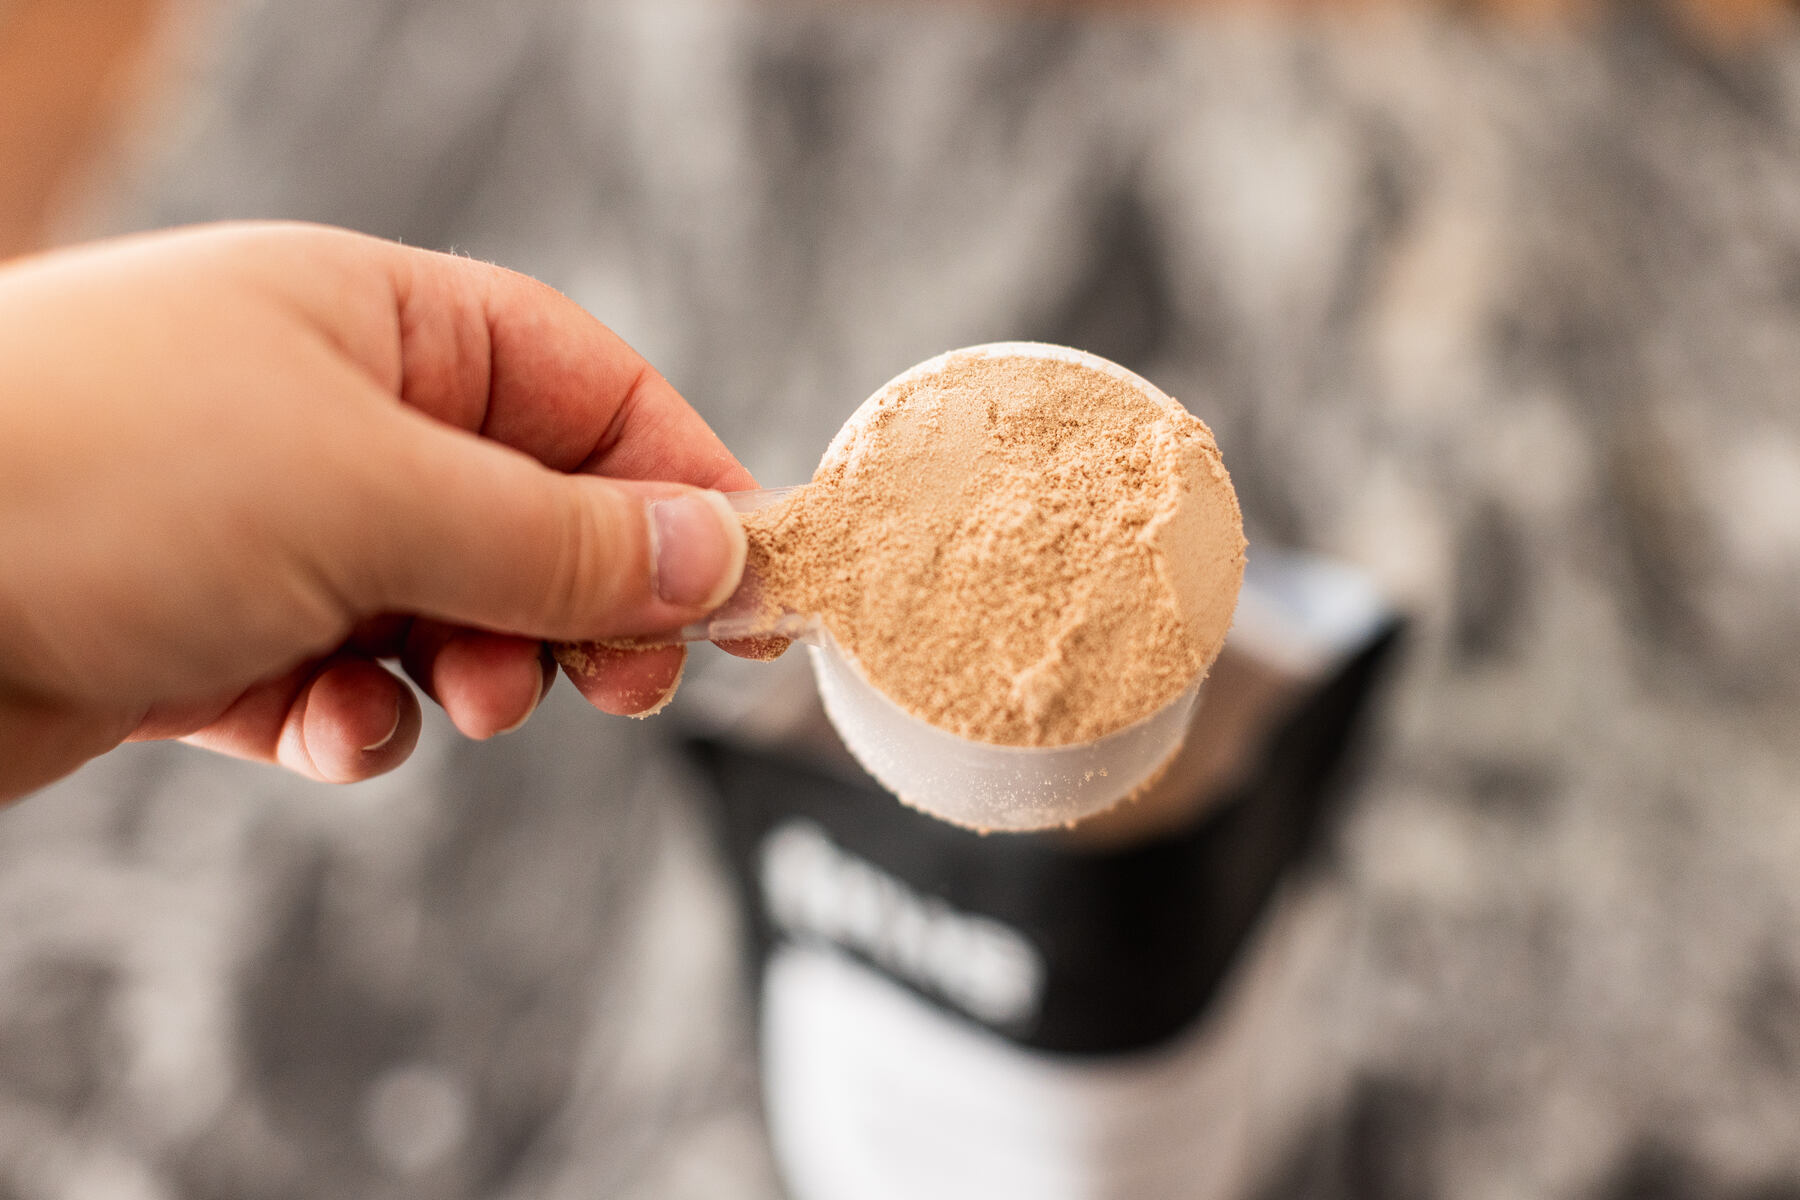 Person holding a scoop of whey protein powder over a black and white granite countertop